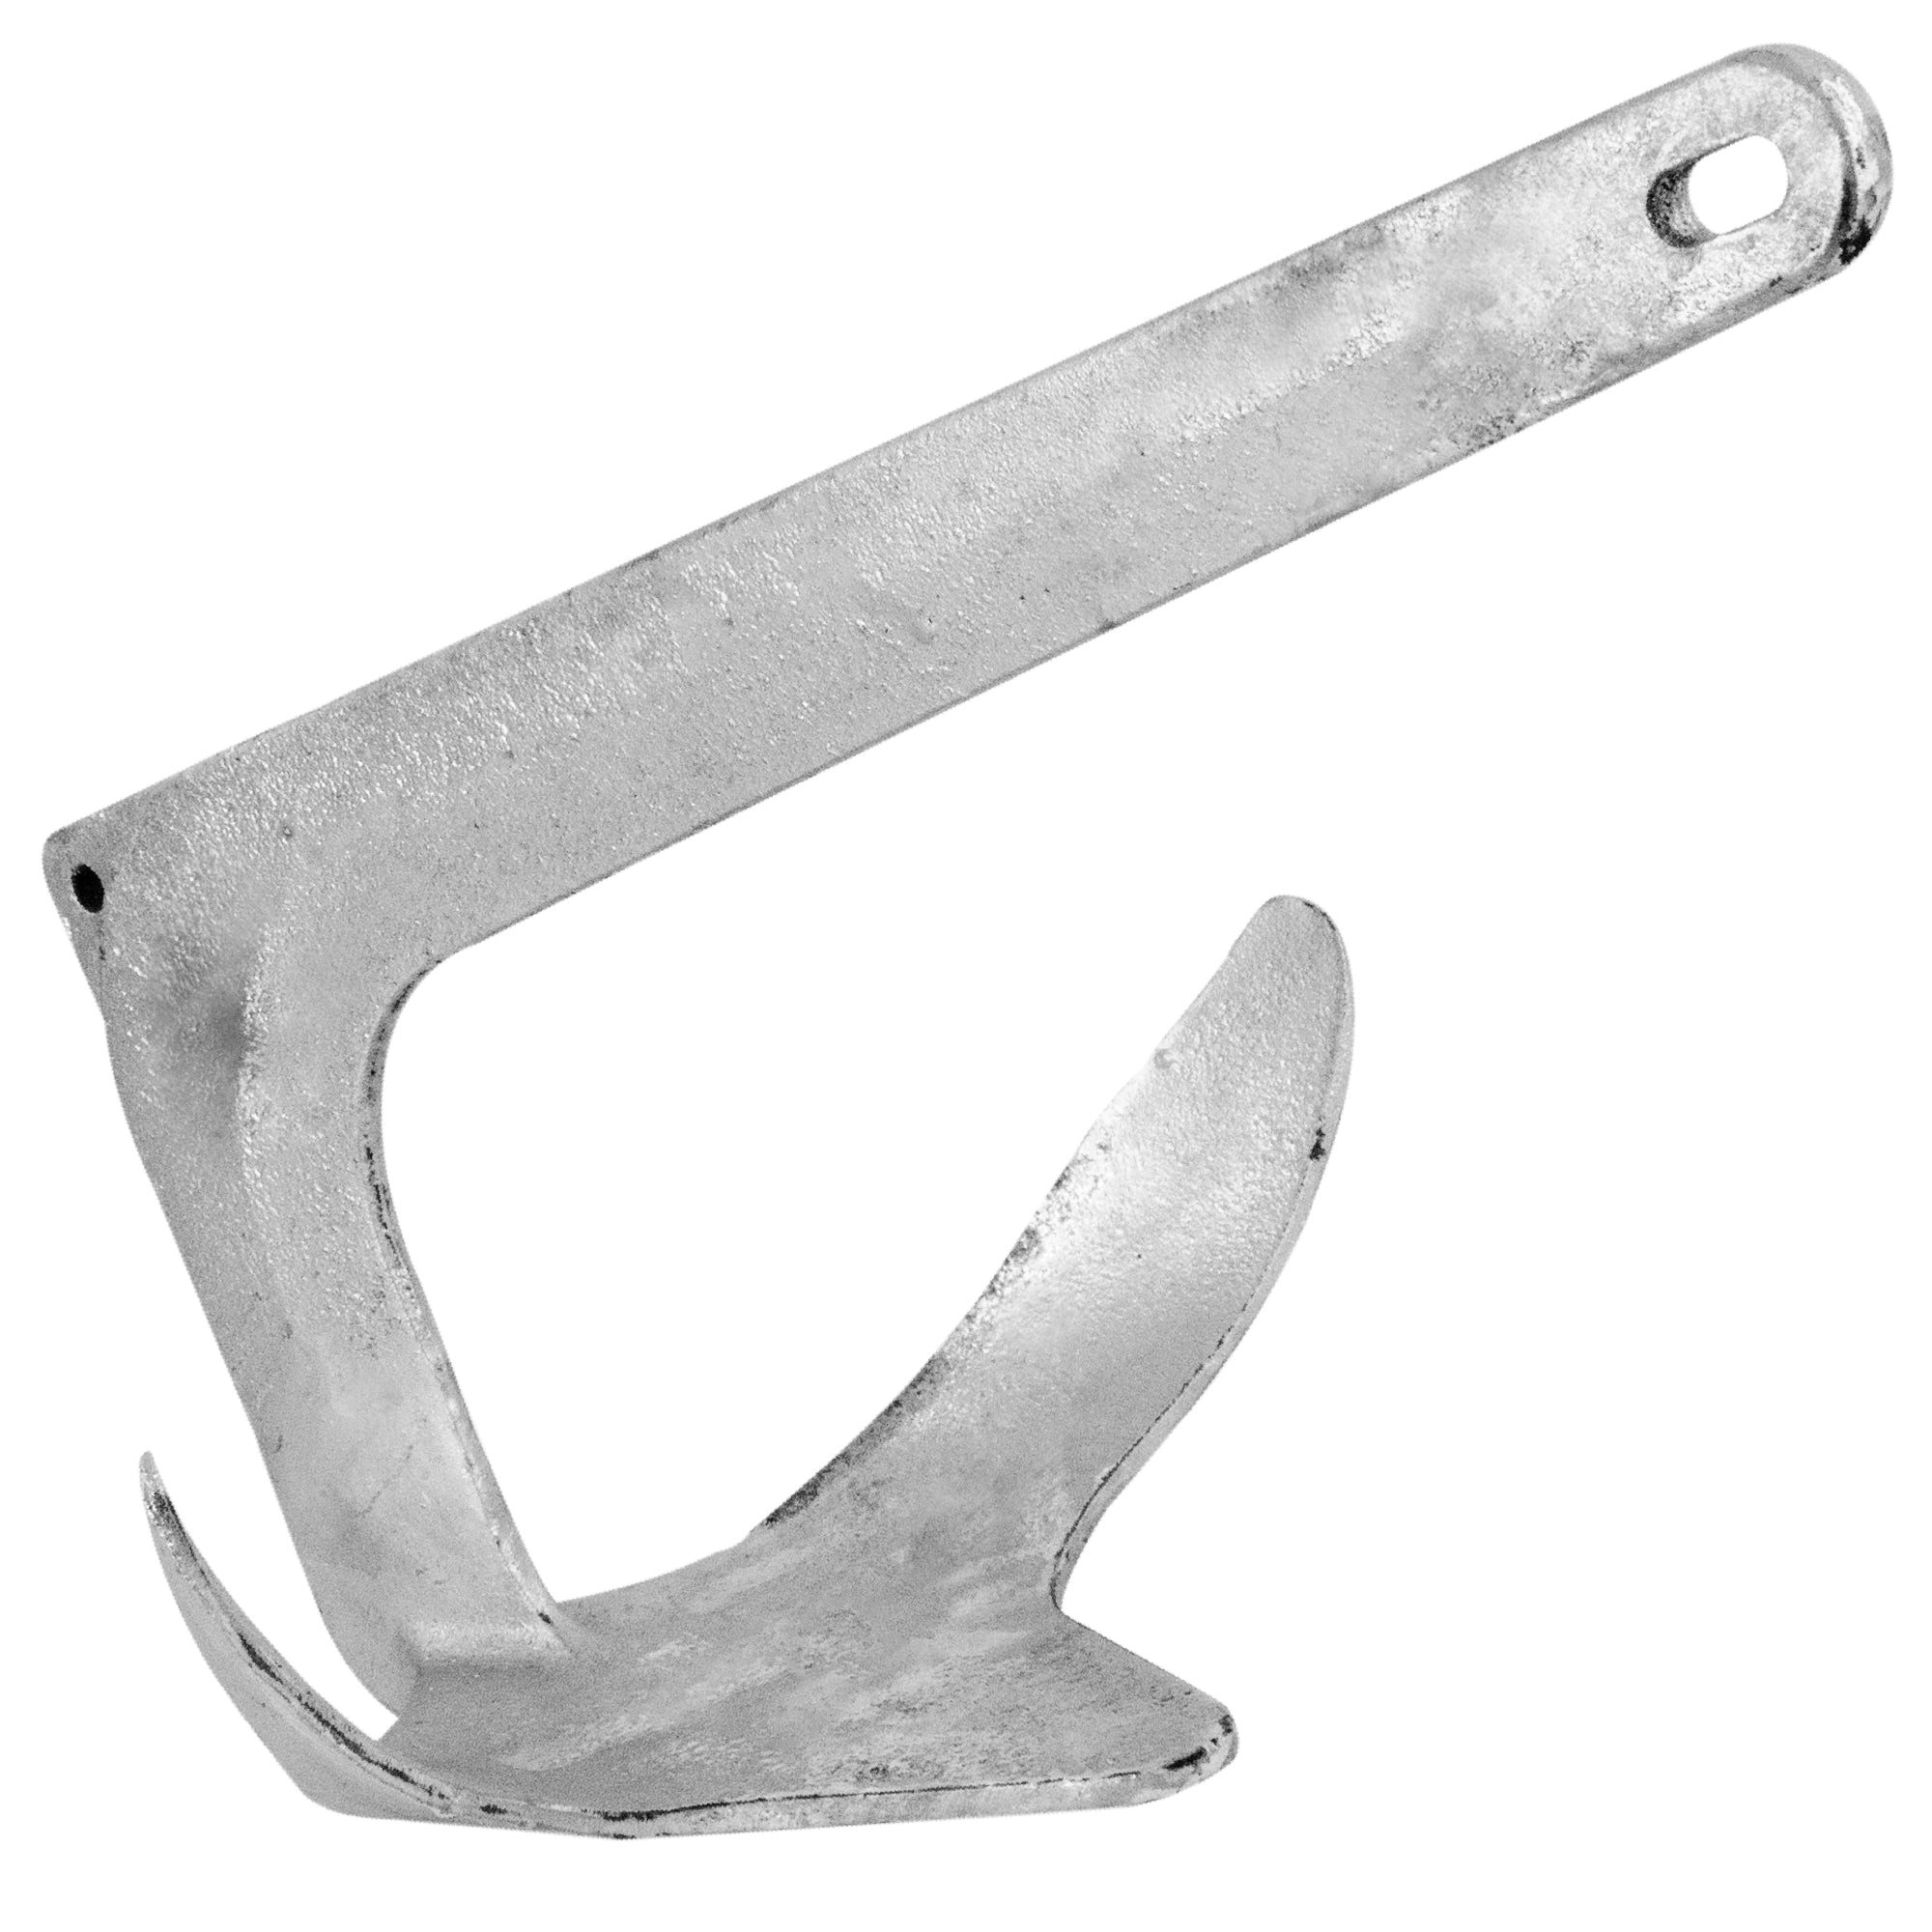 Bruce Style Claw Anchor, 4.4 Lb / 2Kg Hot Dipped Galvanized - FO4551